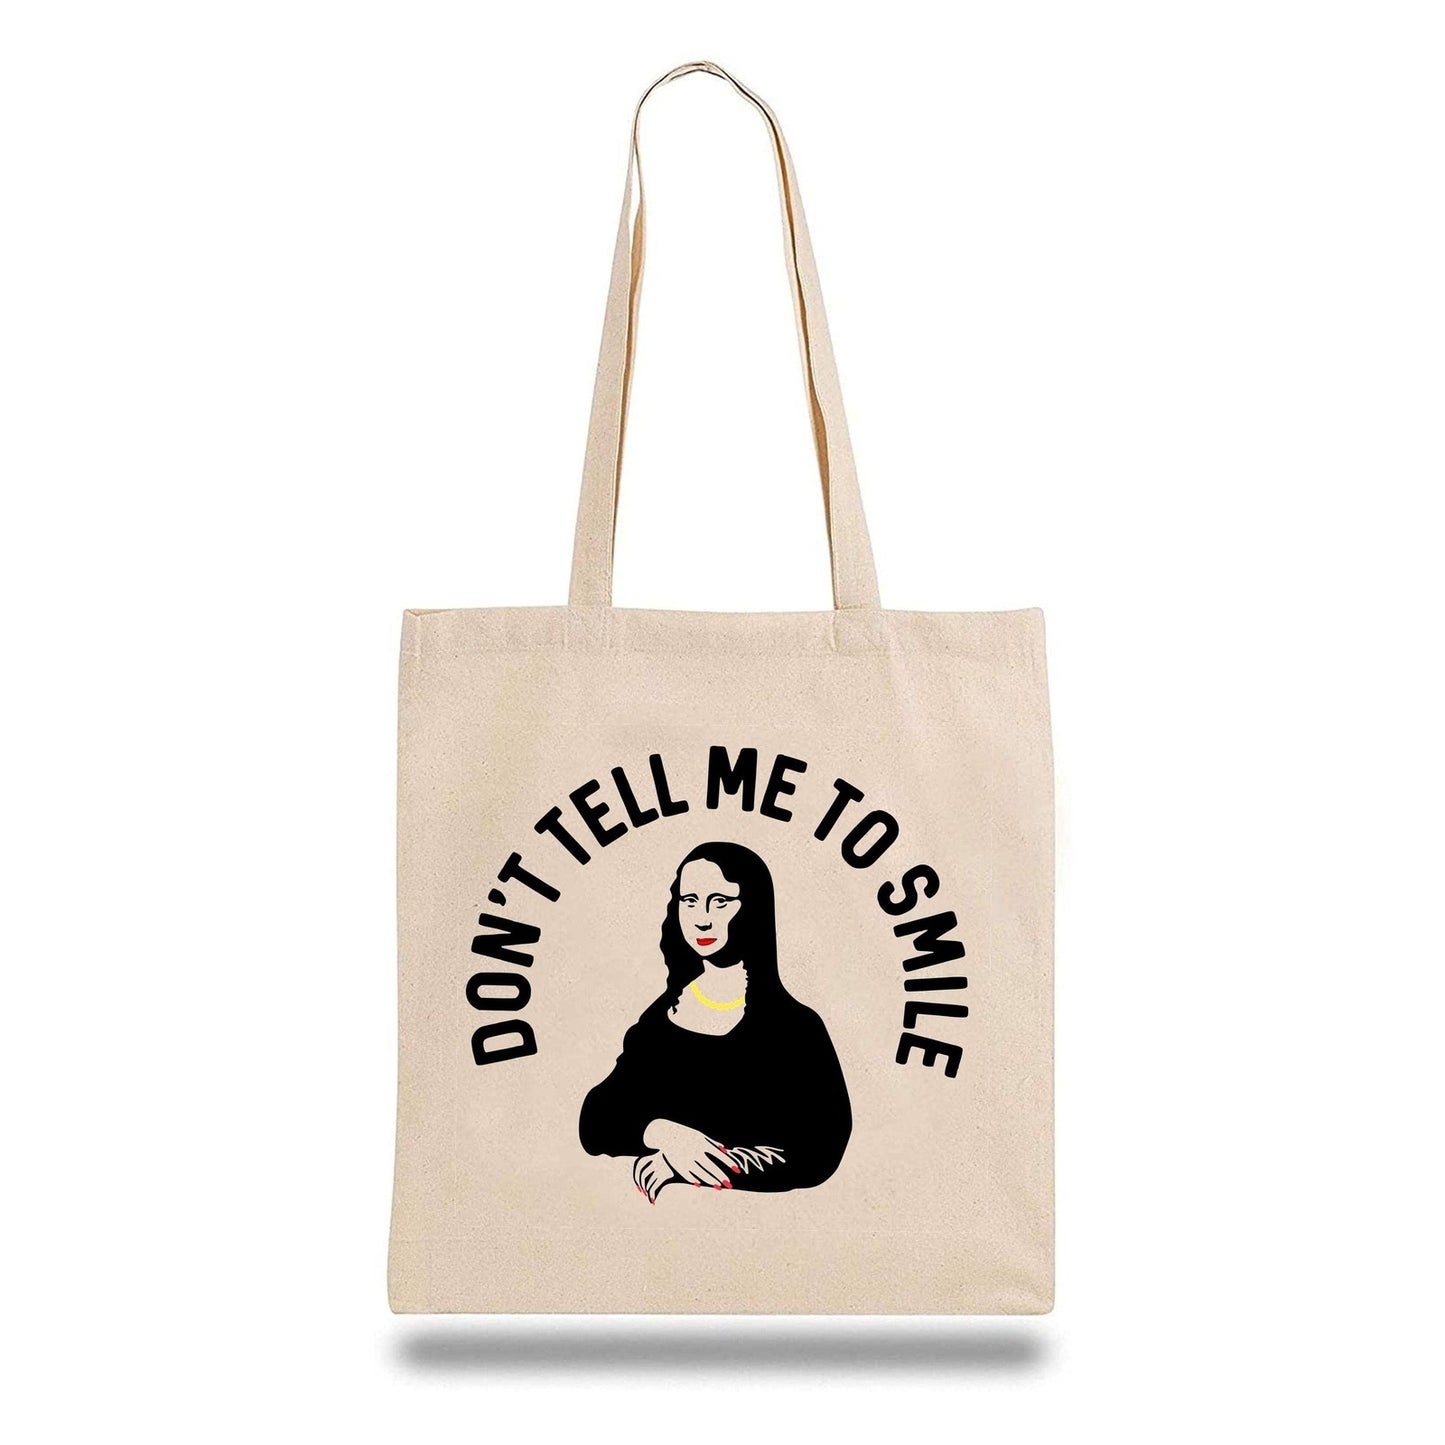 Don't Tell Me To Smile Tote Bag